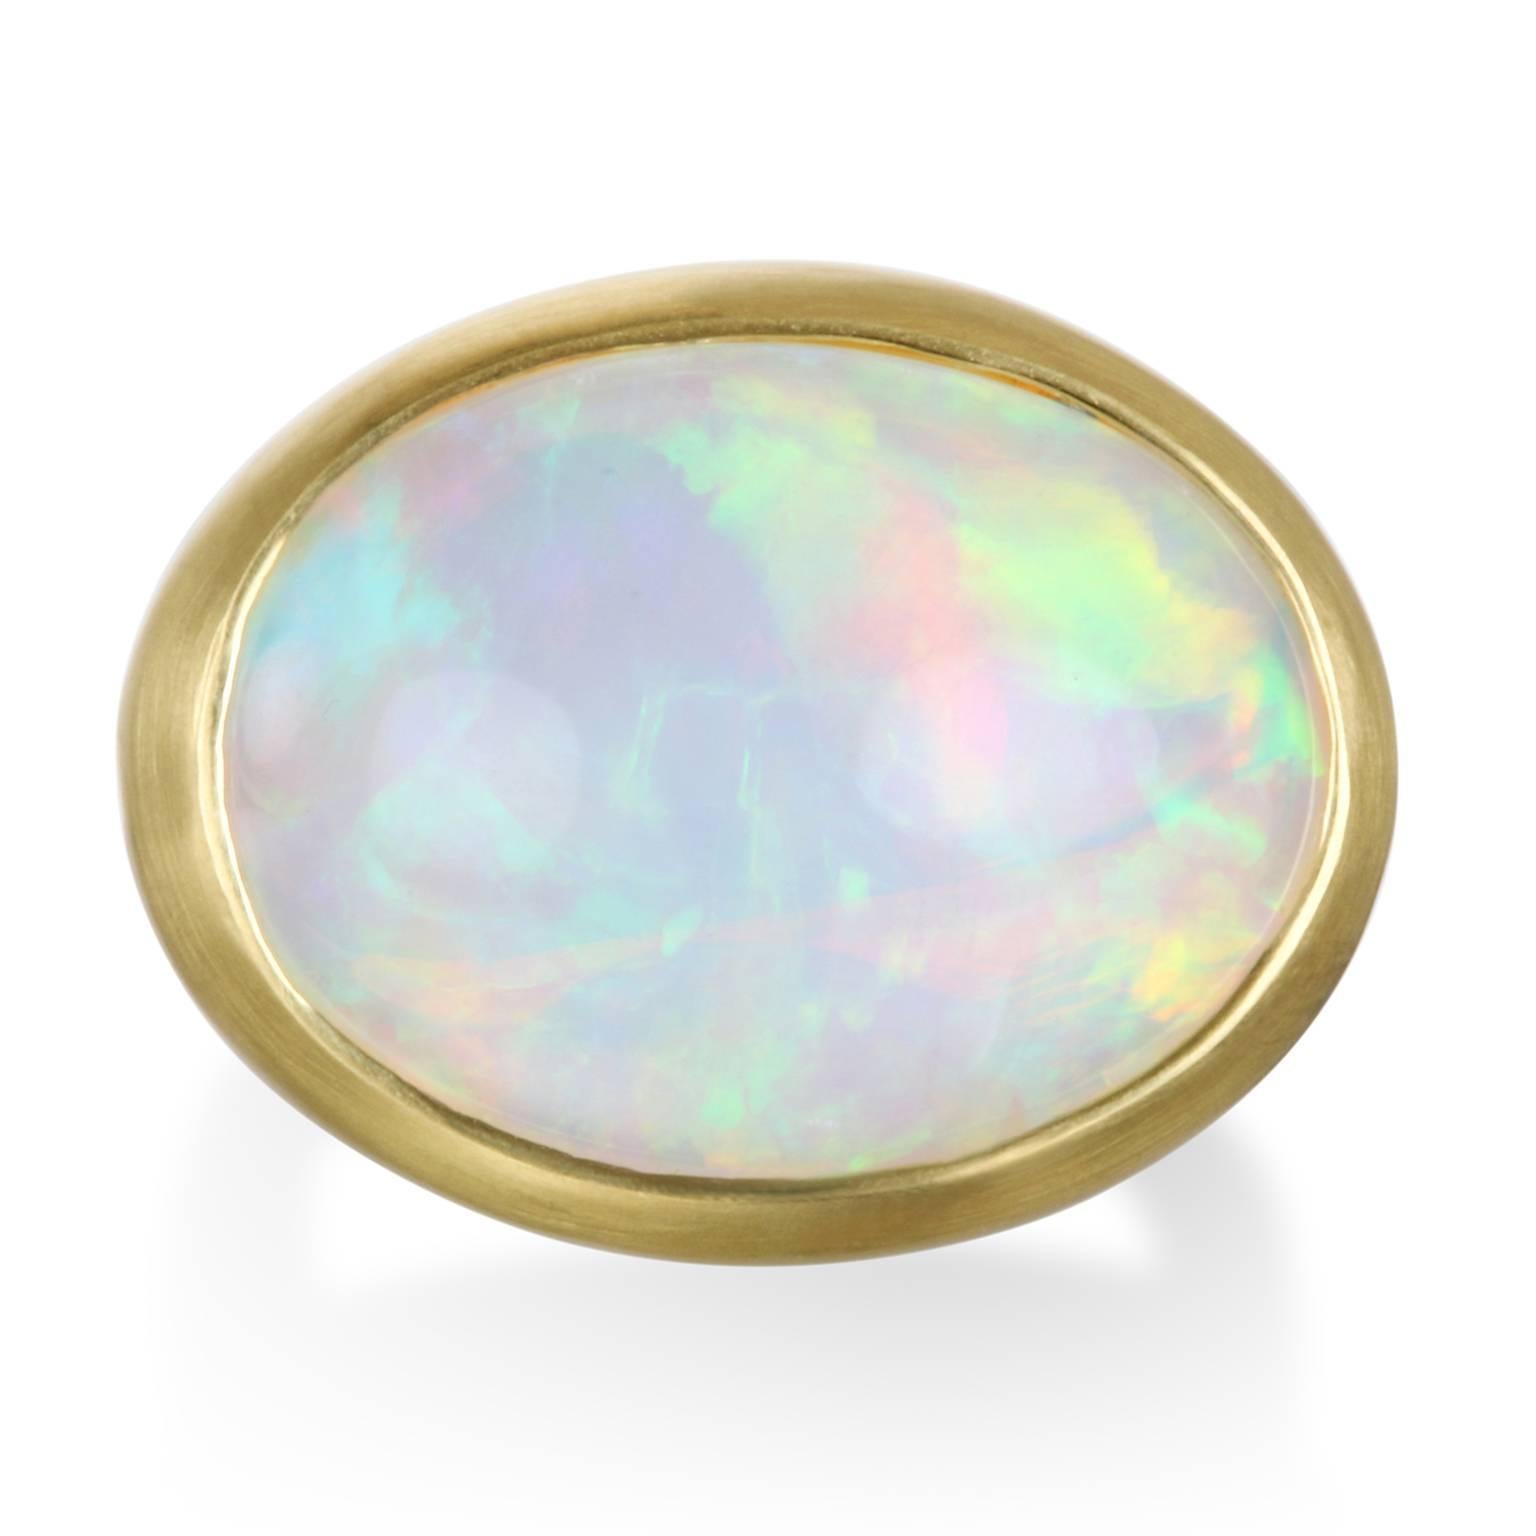 The striking color pallet of Ethiopian Opals is what sets them apart from other gemstones. 
Ethiopian Opals encompass all the splendor of color and texture found in nature. Handcrafted in 18k gold, Faye Kim's bold yet simple and clean design